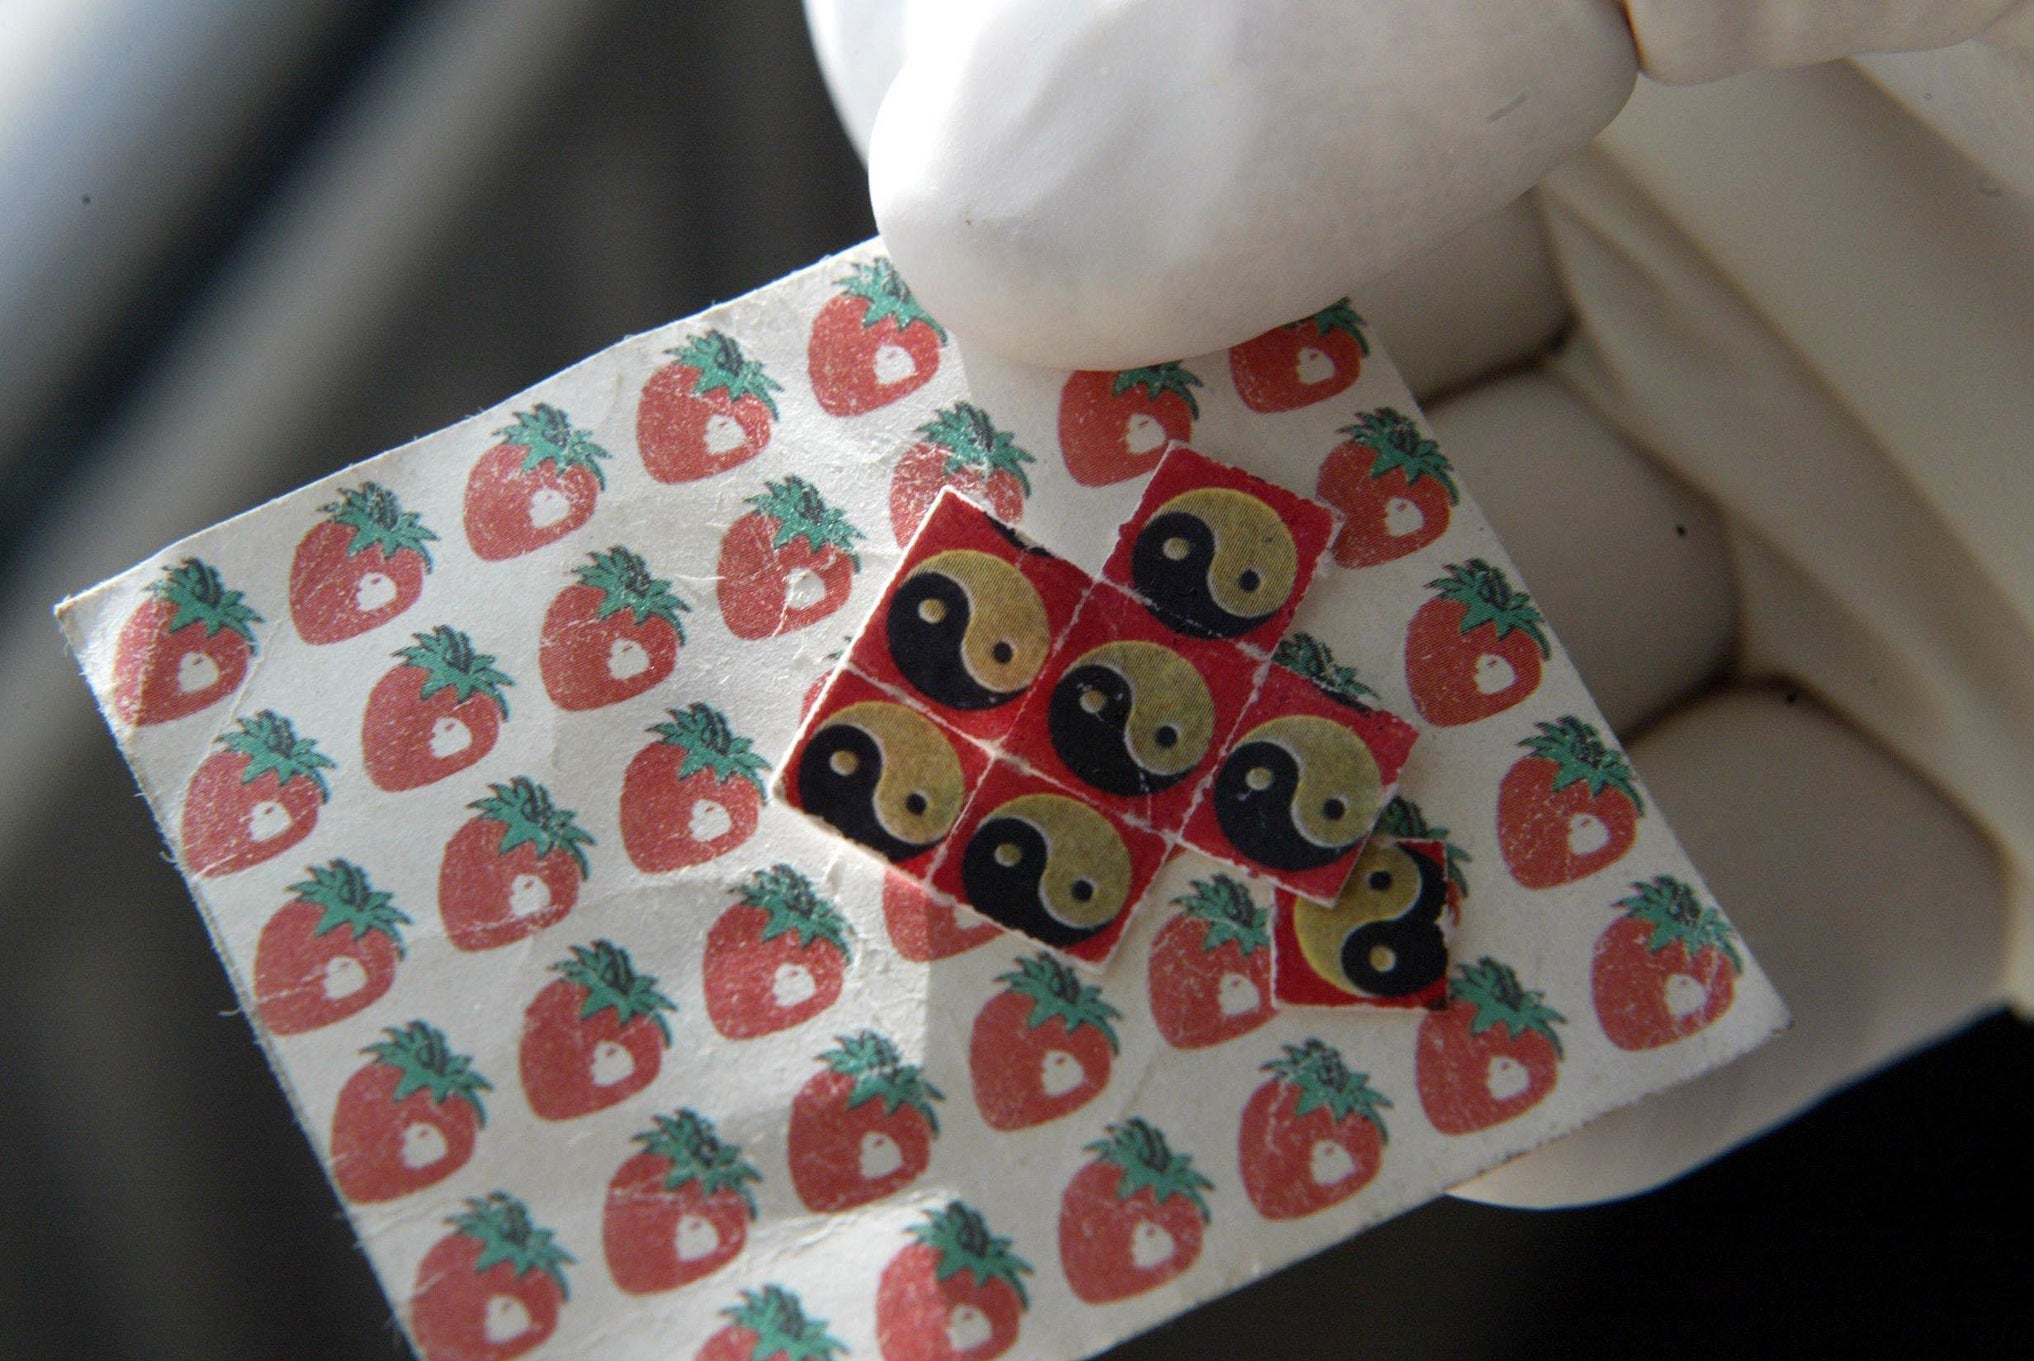 Police warn against &apos;overwhelming&apos; paper square LSD drugs